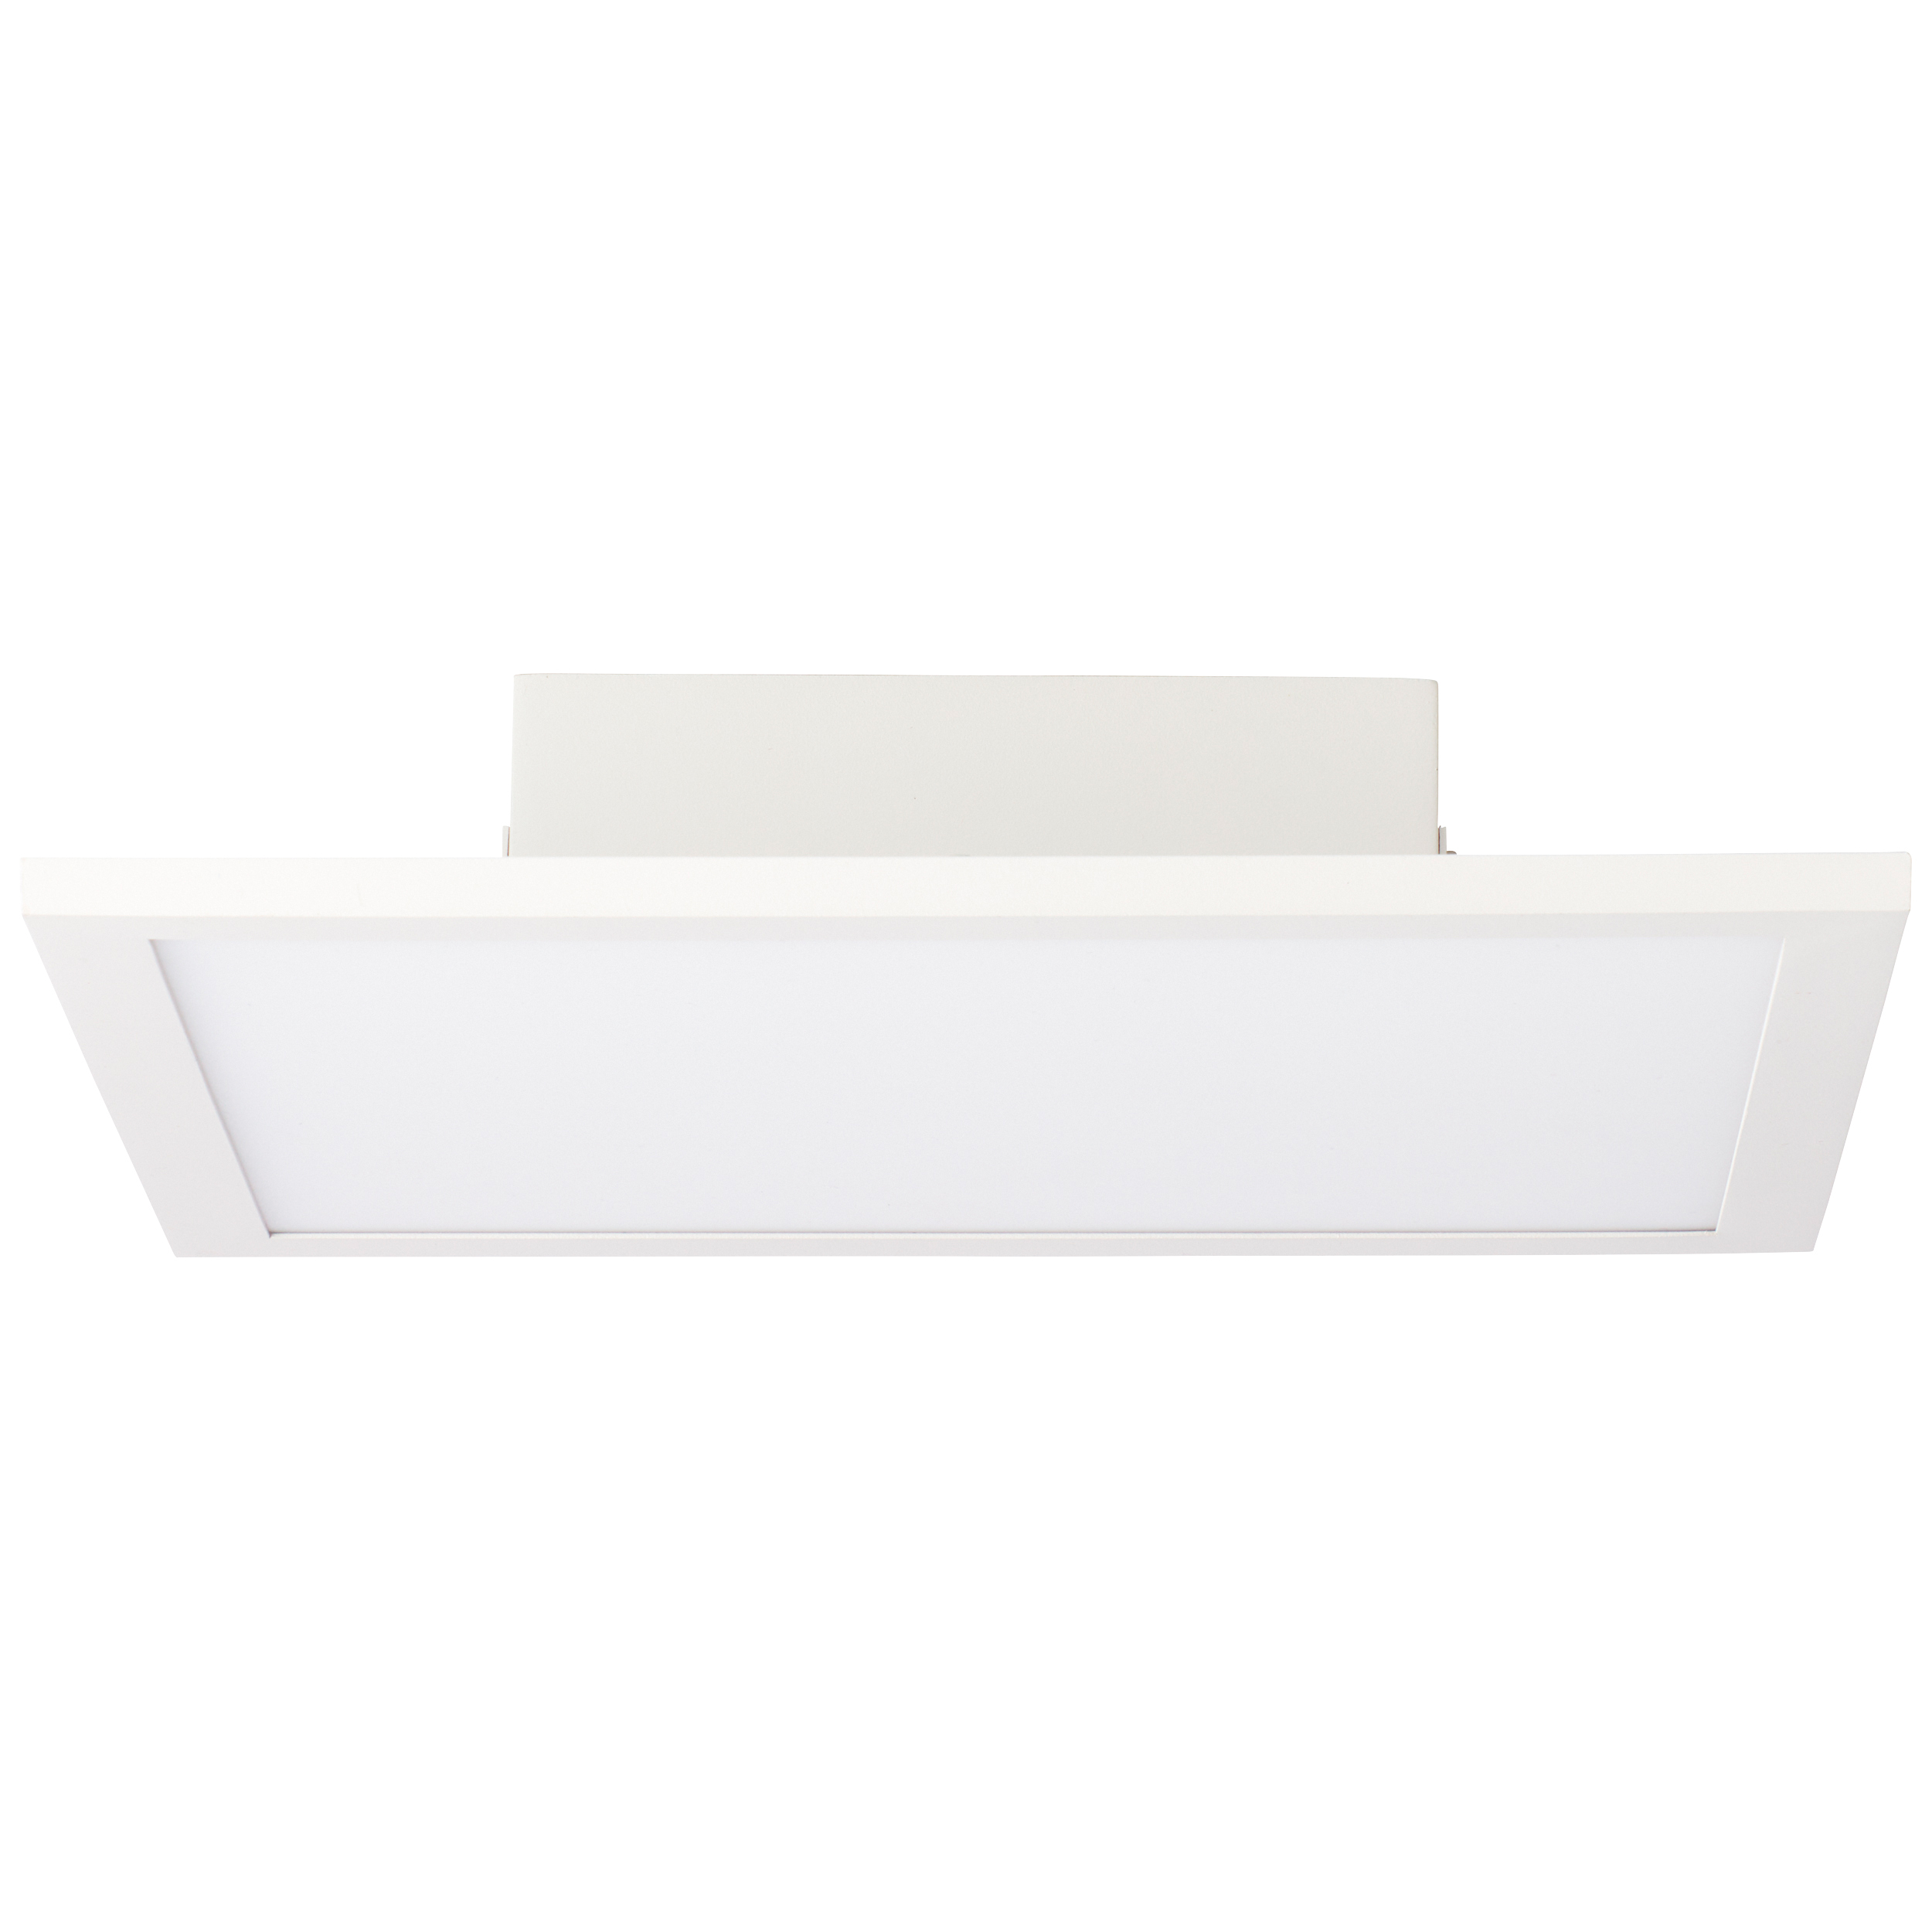 Buffi LED surface-mounted ceiling panel 30x30cm white/cold white | G90355A85